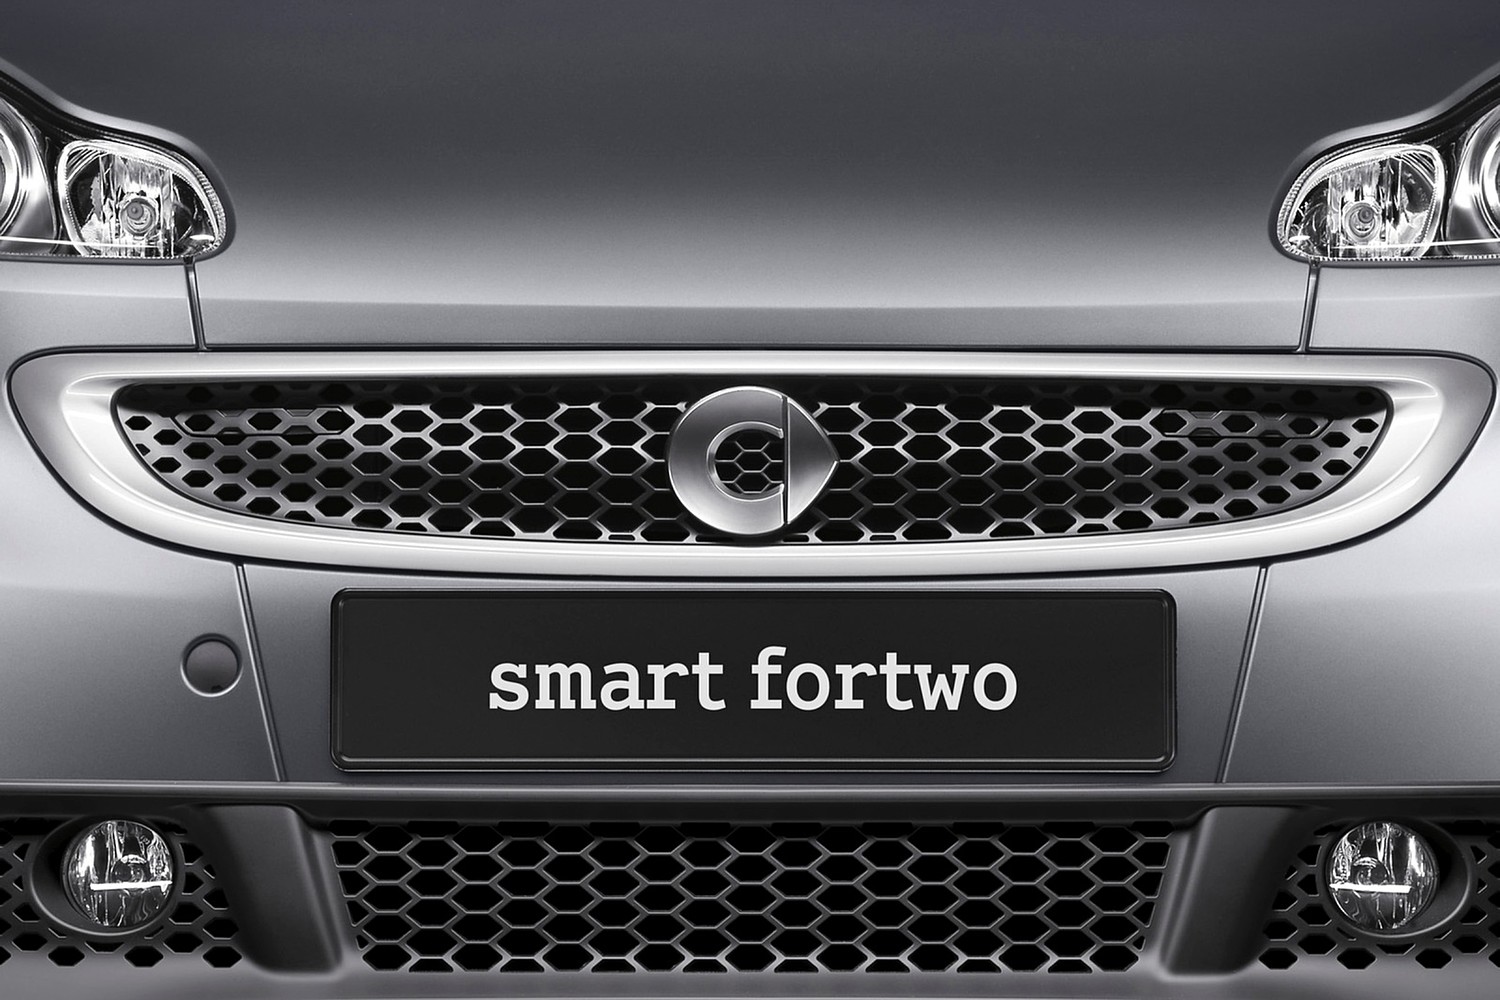 smart fortwo passion coupe 2dr Hatchback Front Badge (2013 model year shown)